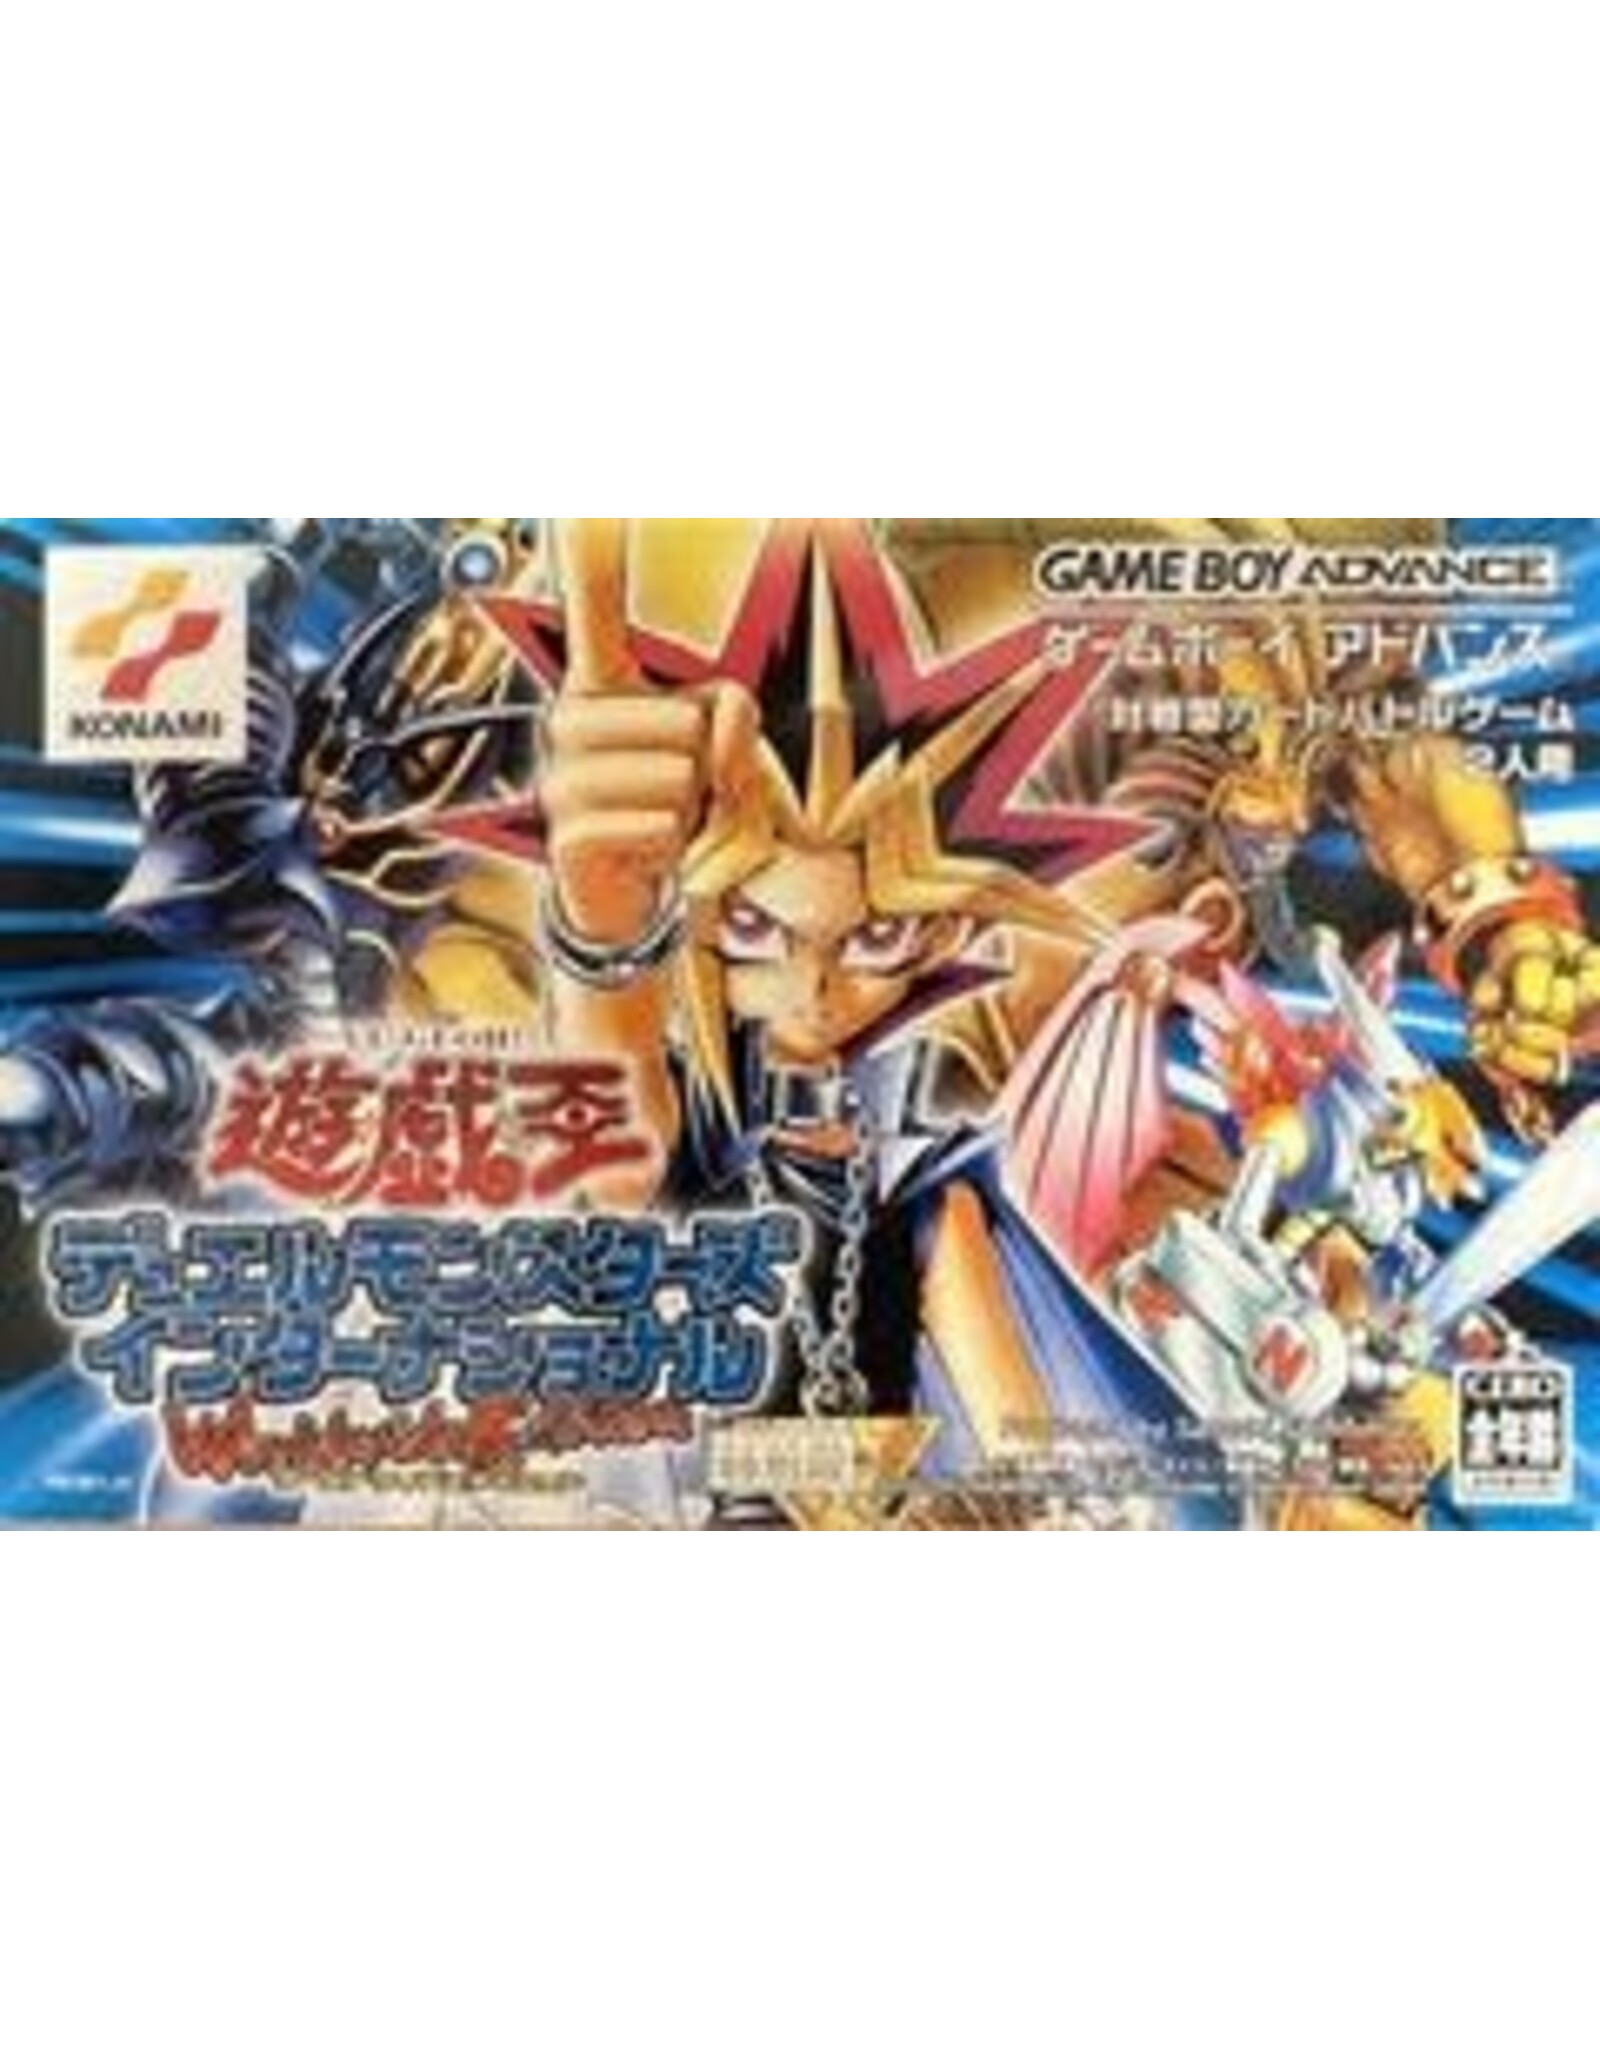 Game Boy Advance Yu-Gi-Oh! Worldwide Edition (Cart Only, JP Import)